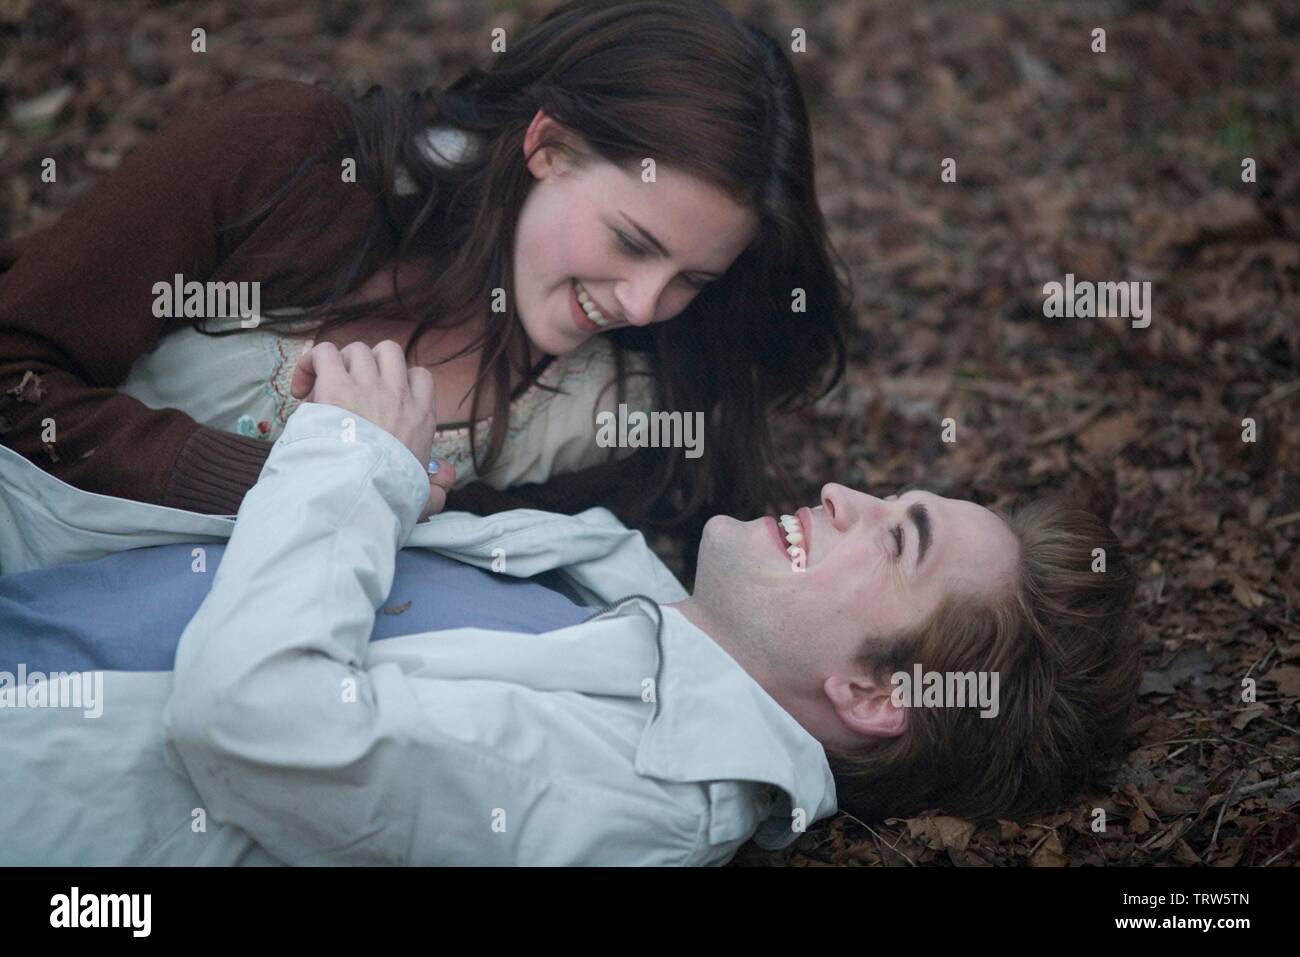 ROBERT PATTINSON and KRISTEN STEWART in TWILIGHT (2008). Copyright: Editorial use only. No merchandising or book covers. This is a publicly distributed handout. Access rights only, no license of copyright provided. Only to be reproduced in conjunction with promotion of this film. Credit: IMPRINT ENTERTAINMENT/MAVERICK FILMS/SUMMIT ENTERTAINMENT/ / NEWCOMB, DEANA / Album Stock Photo